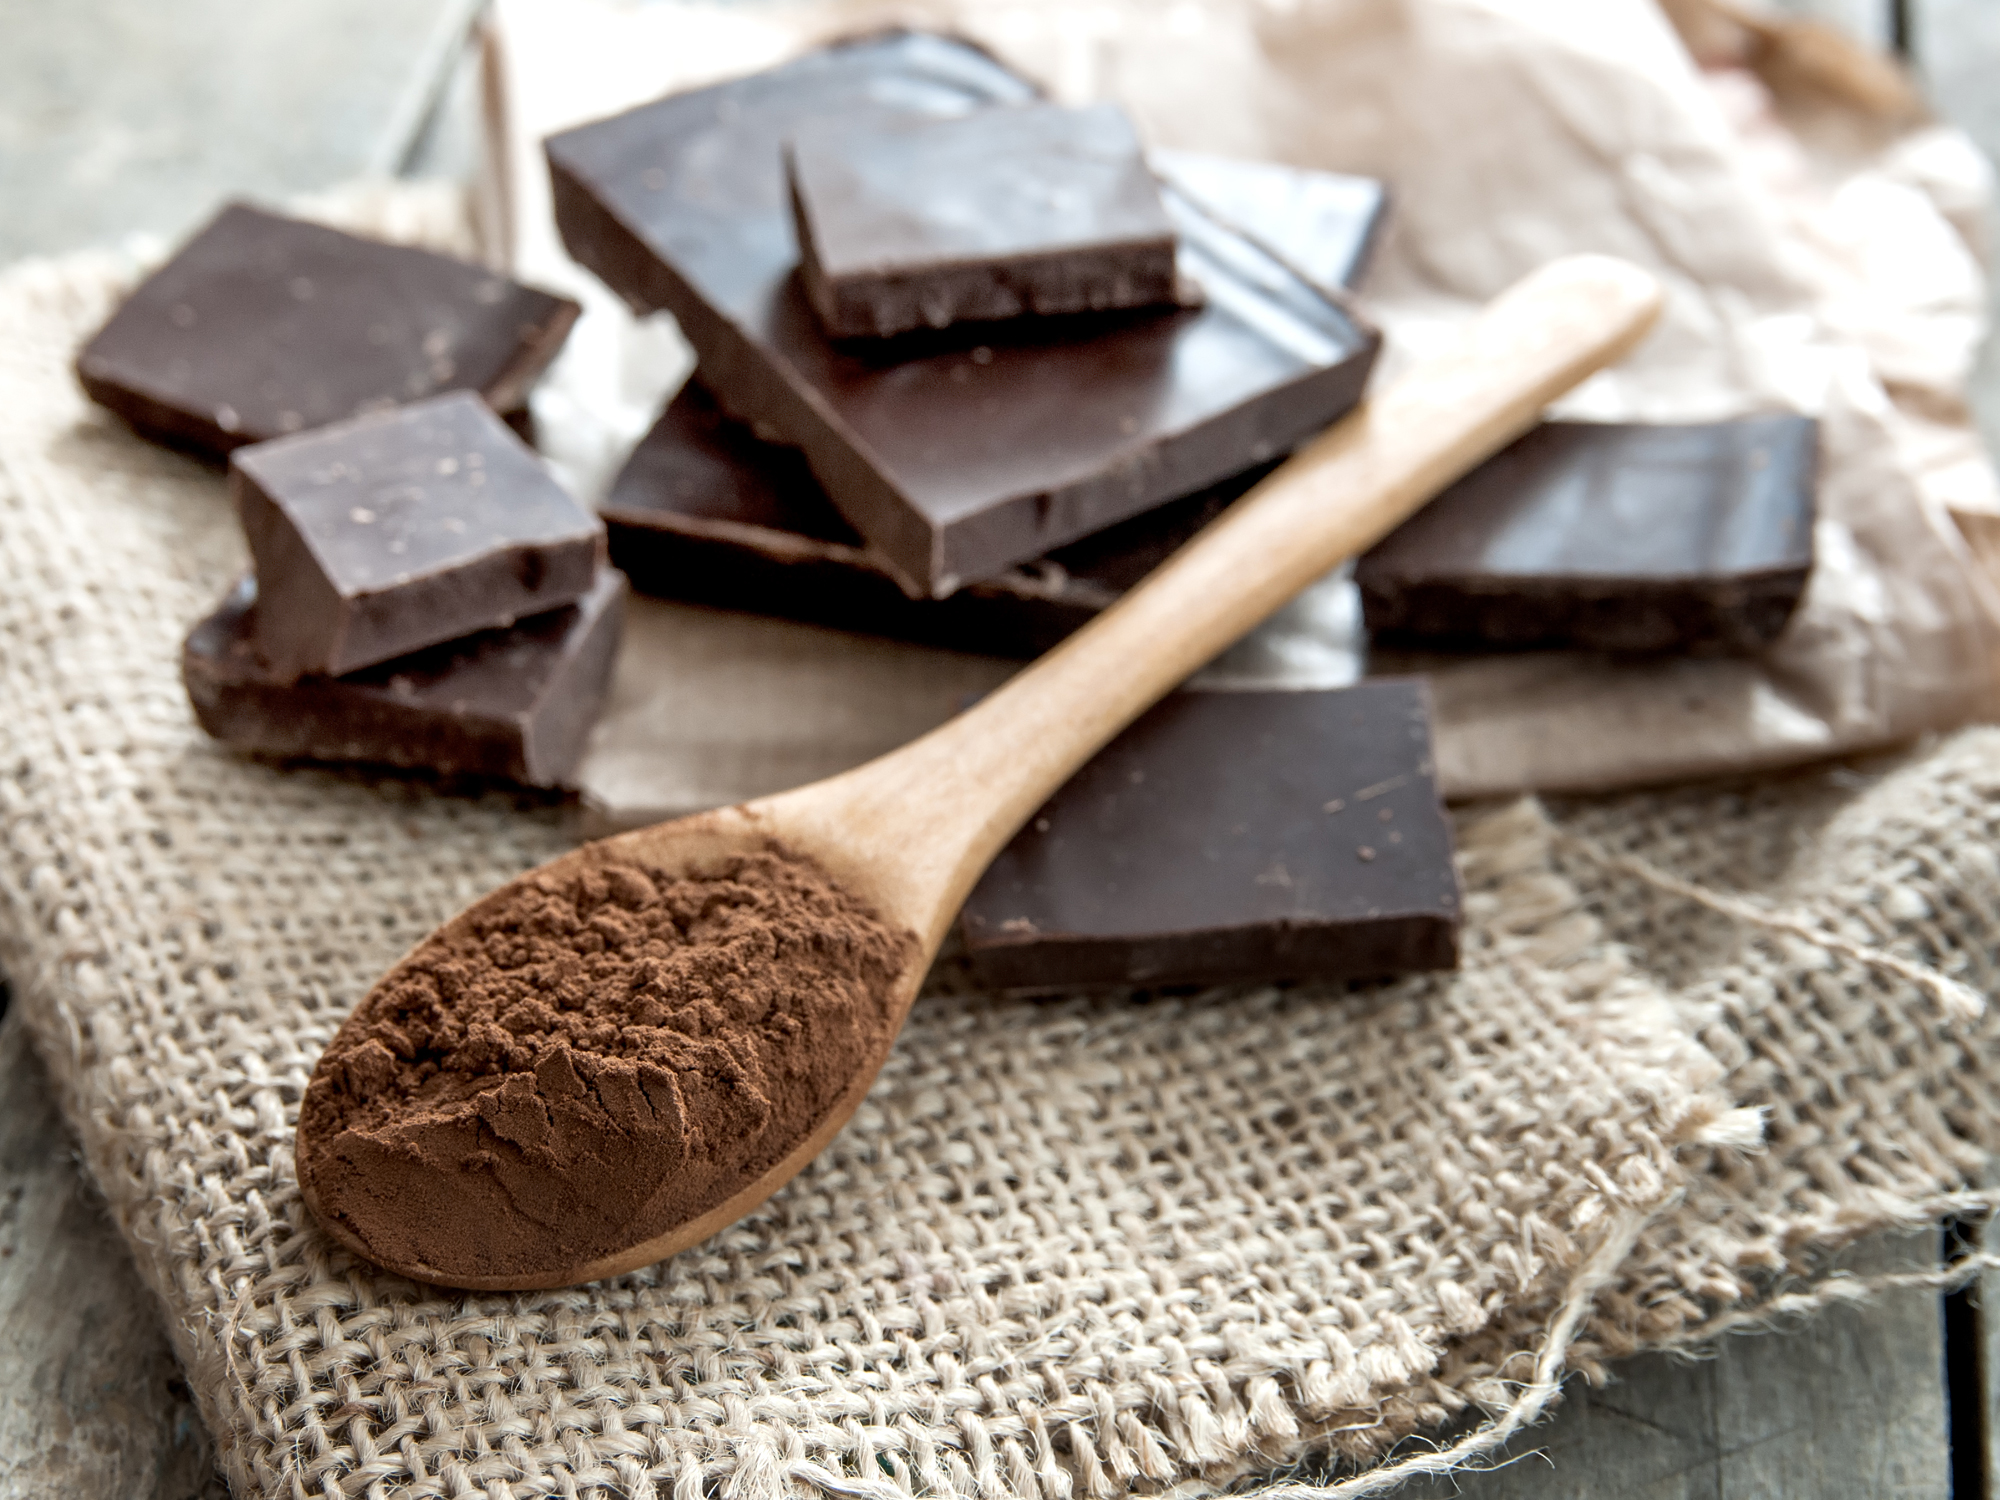 The right ‘chocolate’ prescription to lower your blood pressure